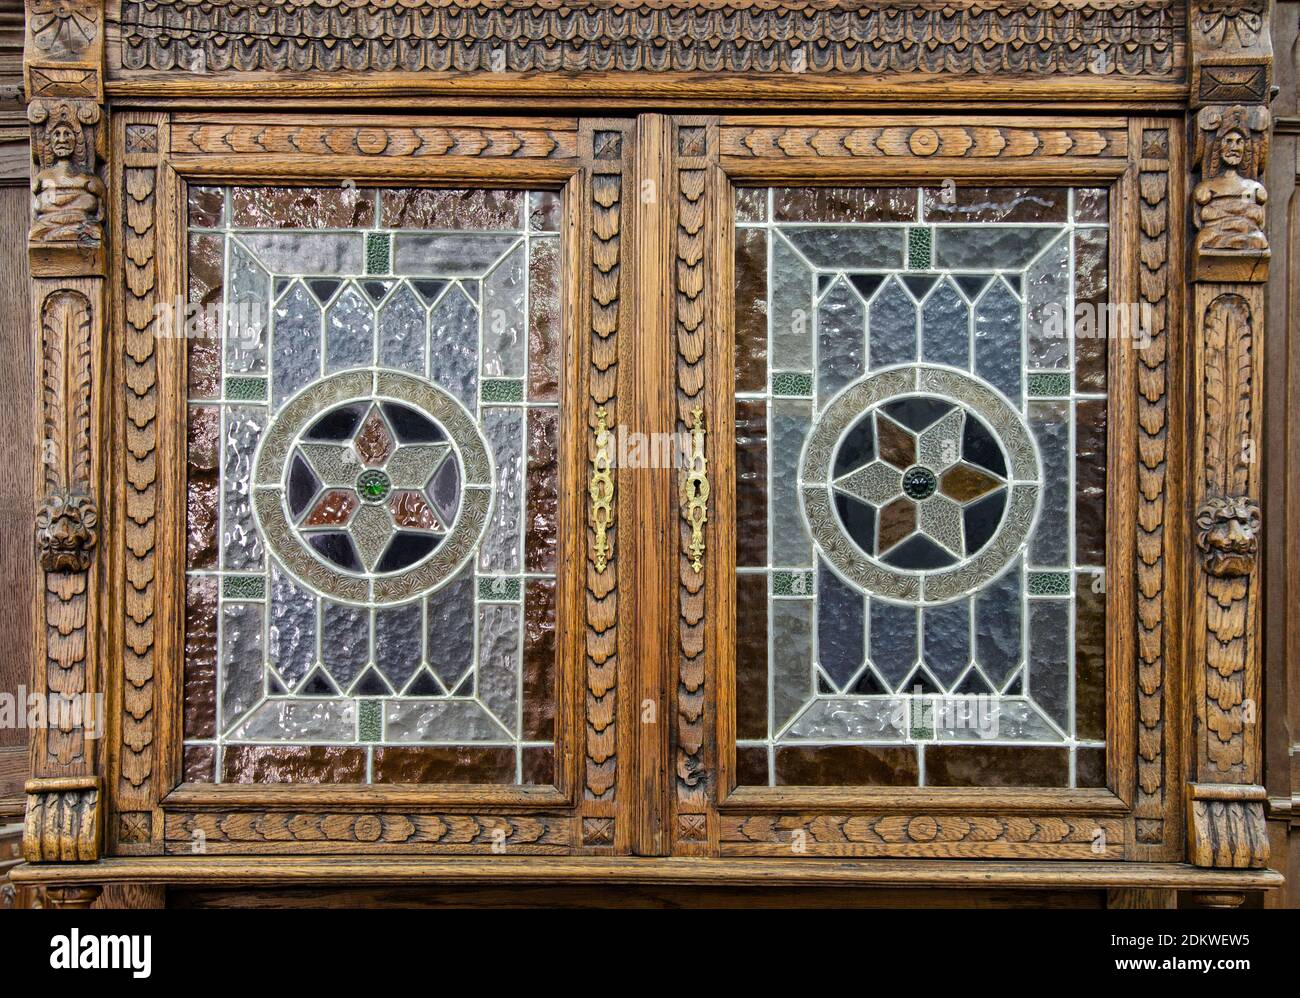 Part of an antique European glass-fronted display cabinet of the end of 19th century. Stock Photo